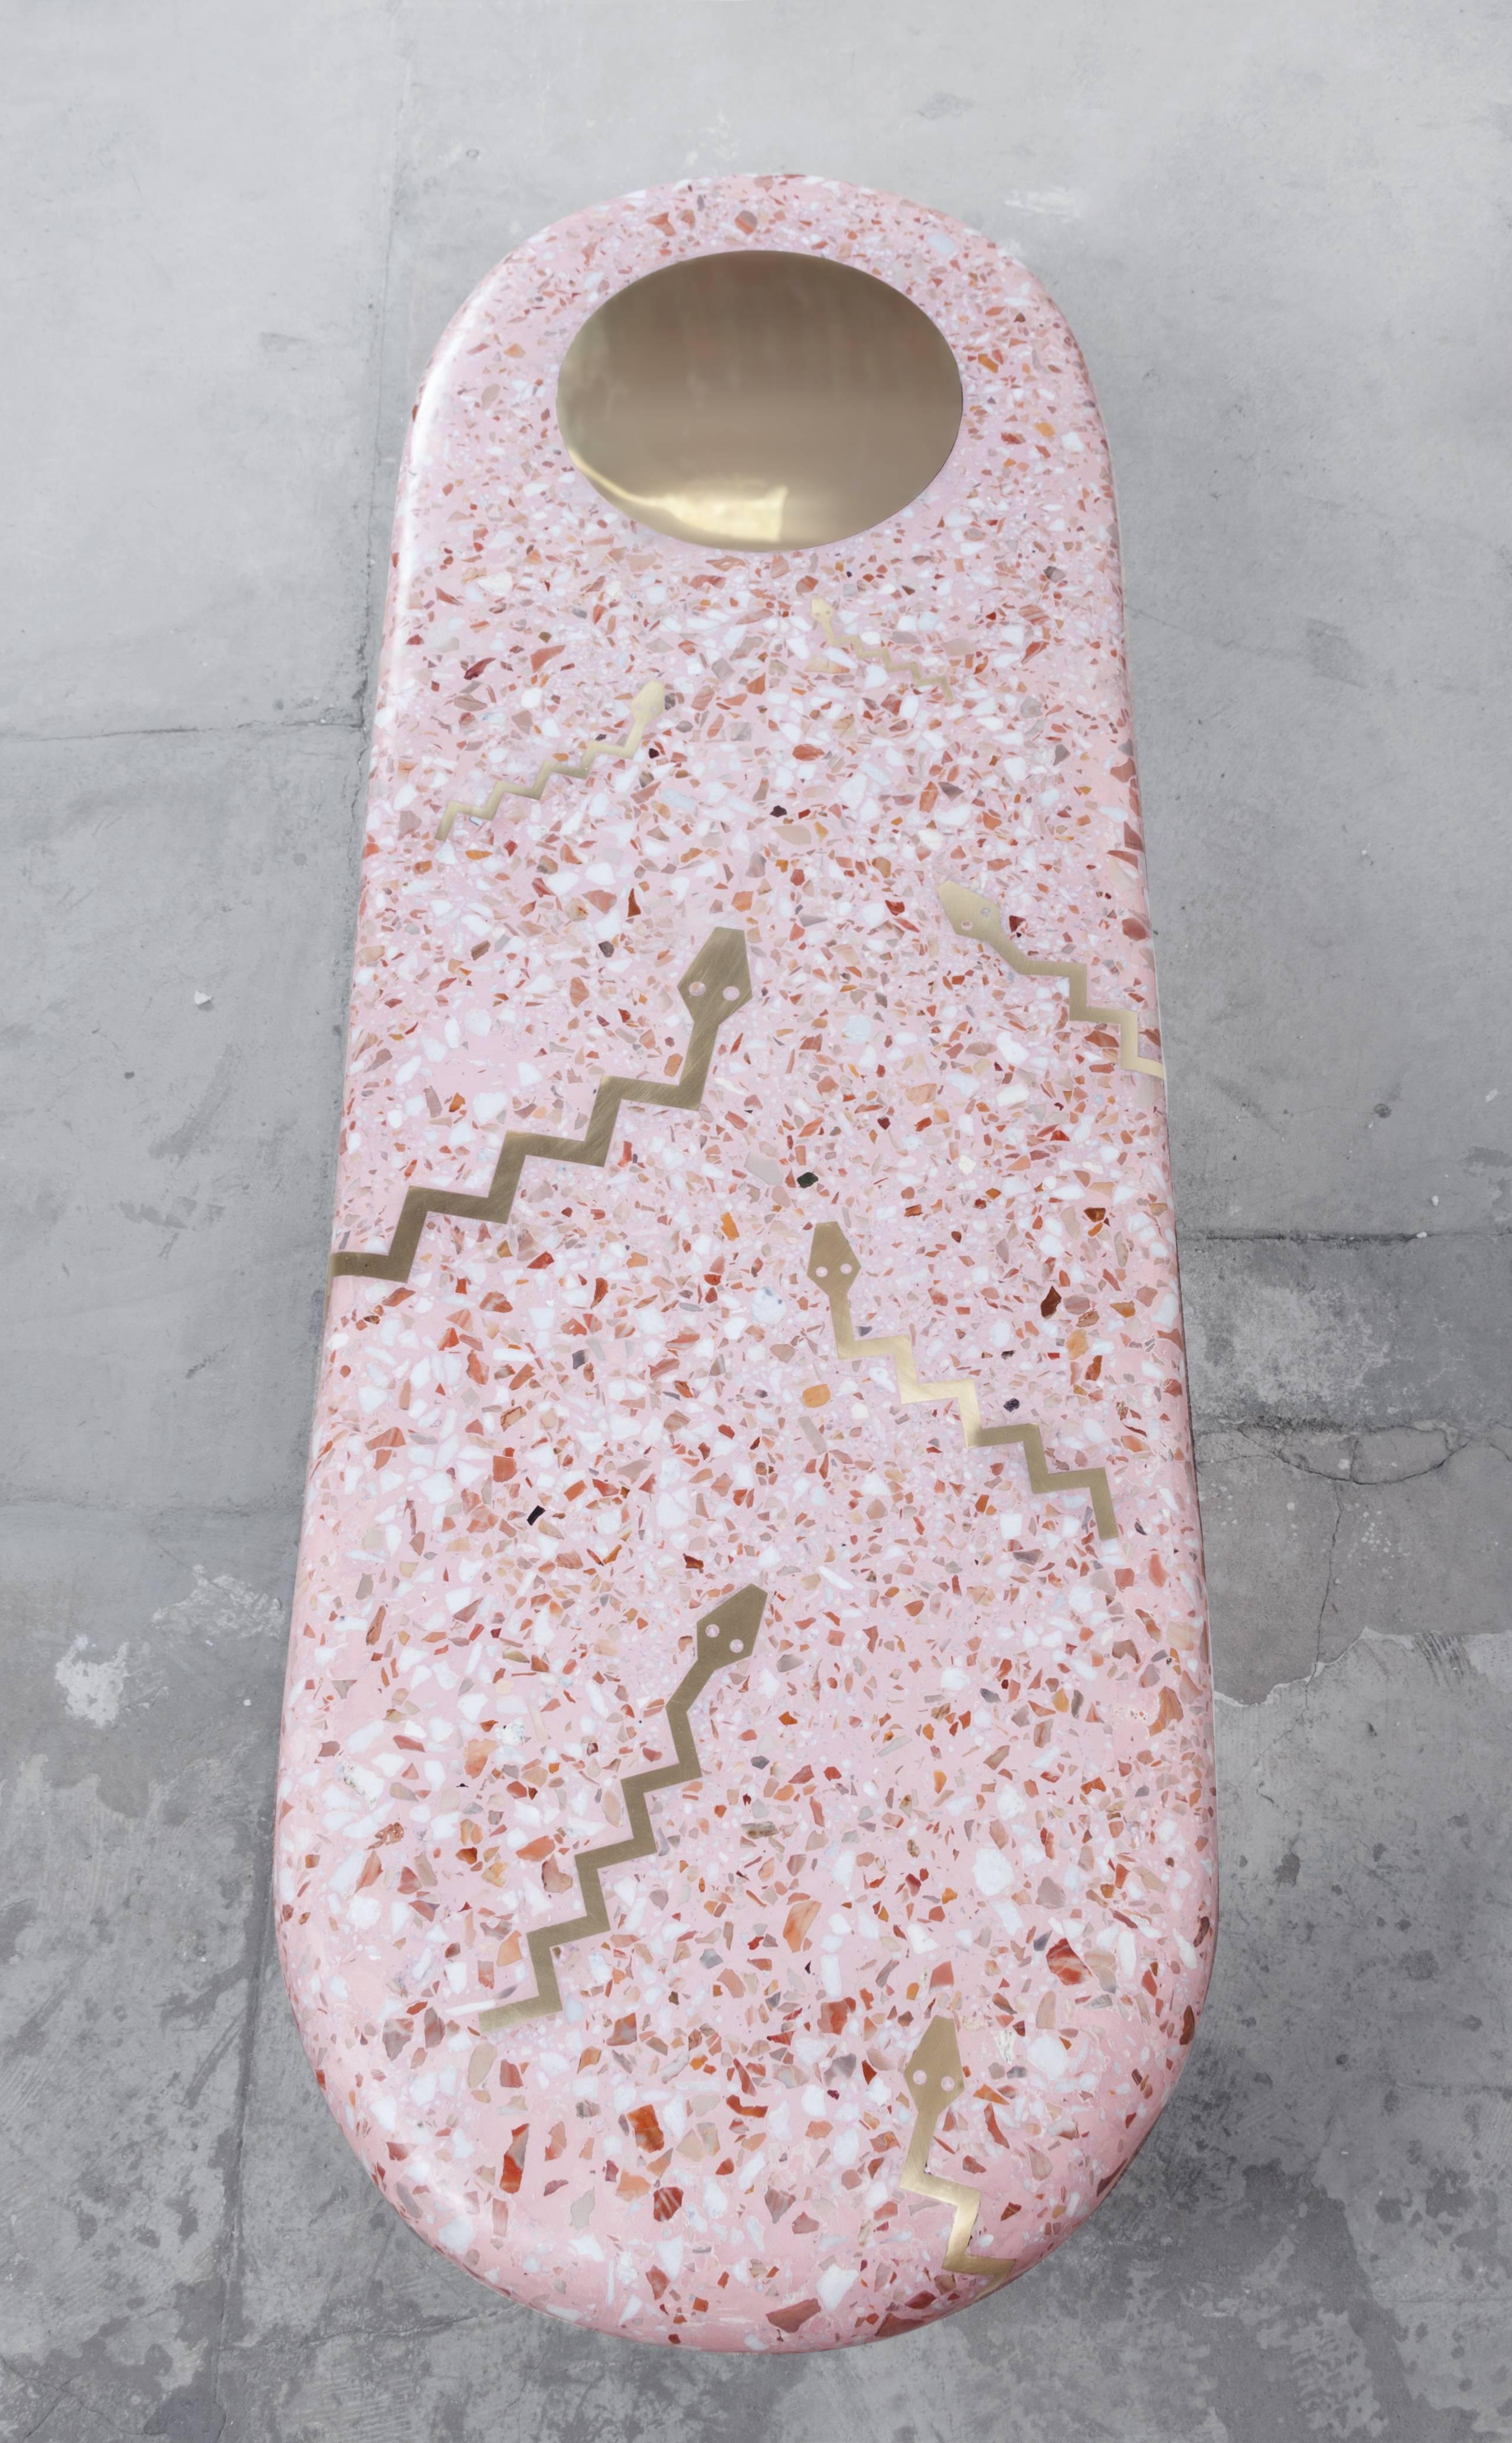 Run to the light sculptural terrazzo coffee table
Shown in pink cement, with natural white and brown marble with brass snake Inlays swimming toward a large brass sun and one cylindrical brass leg.

Custom color, shape, size, and inlays